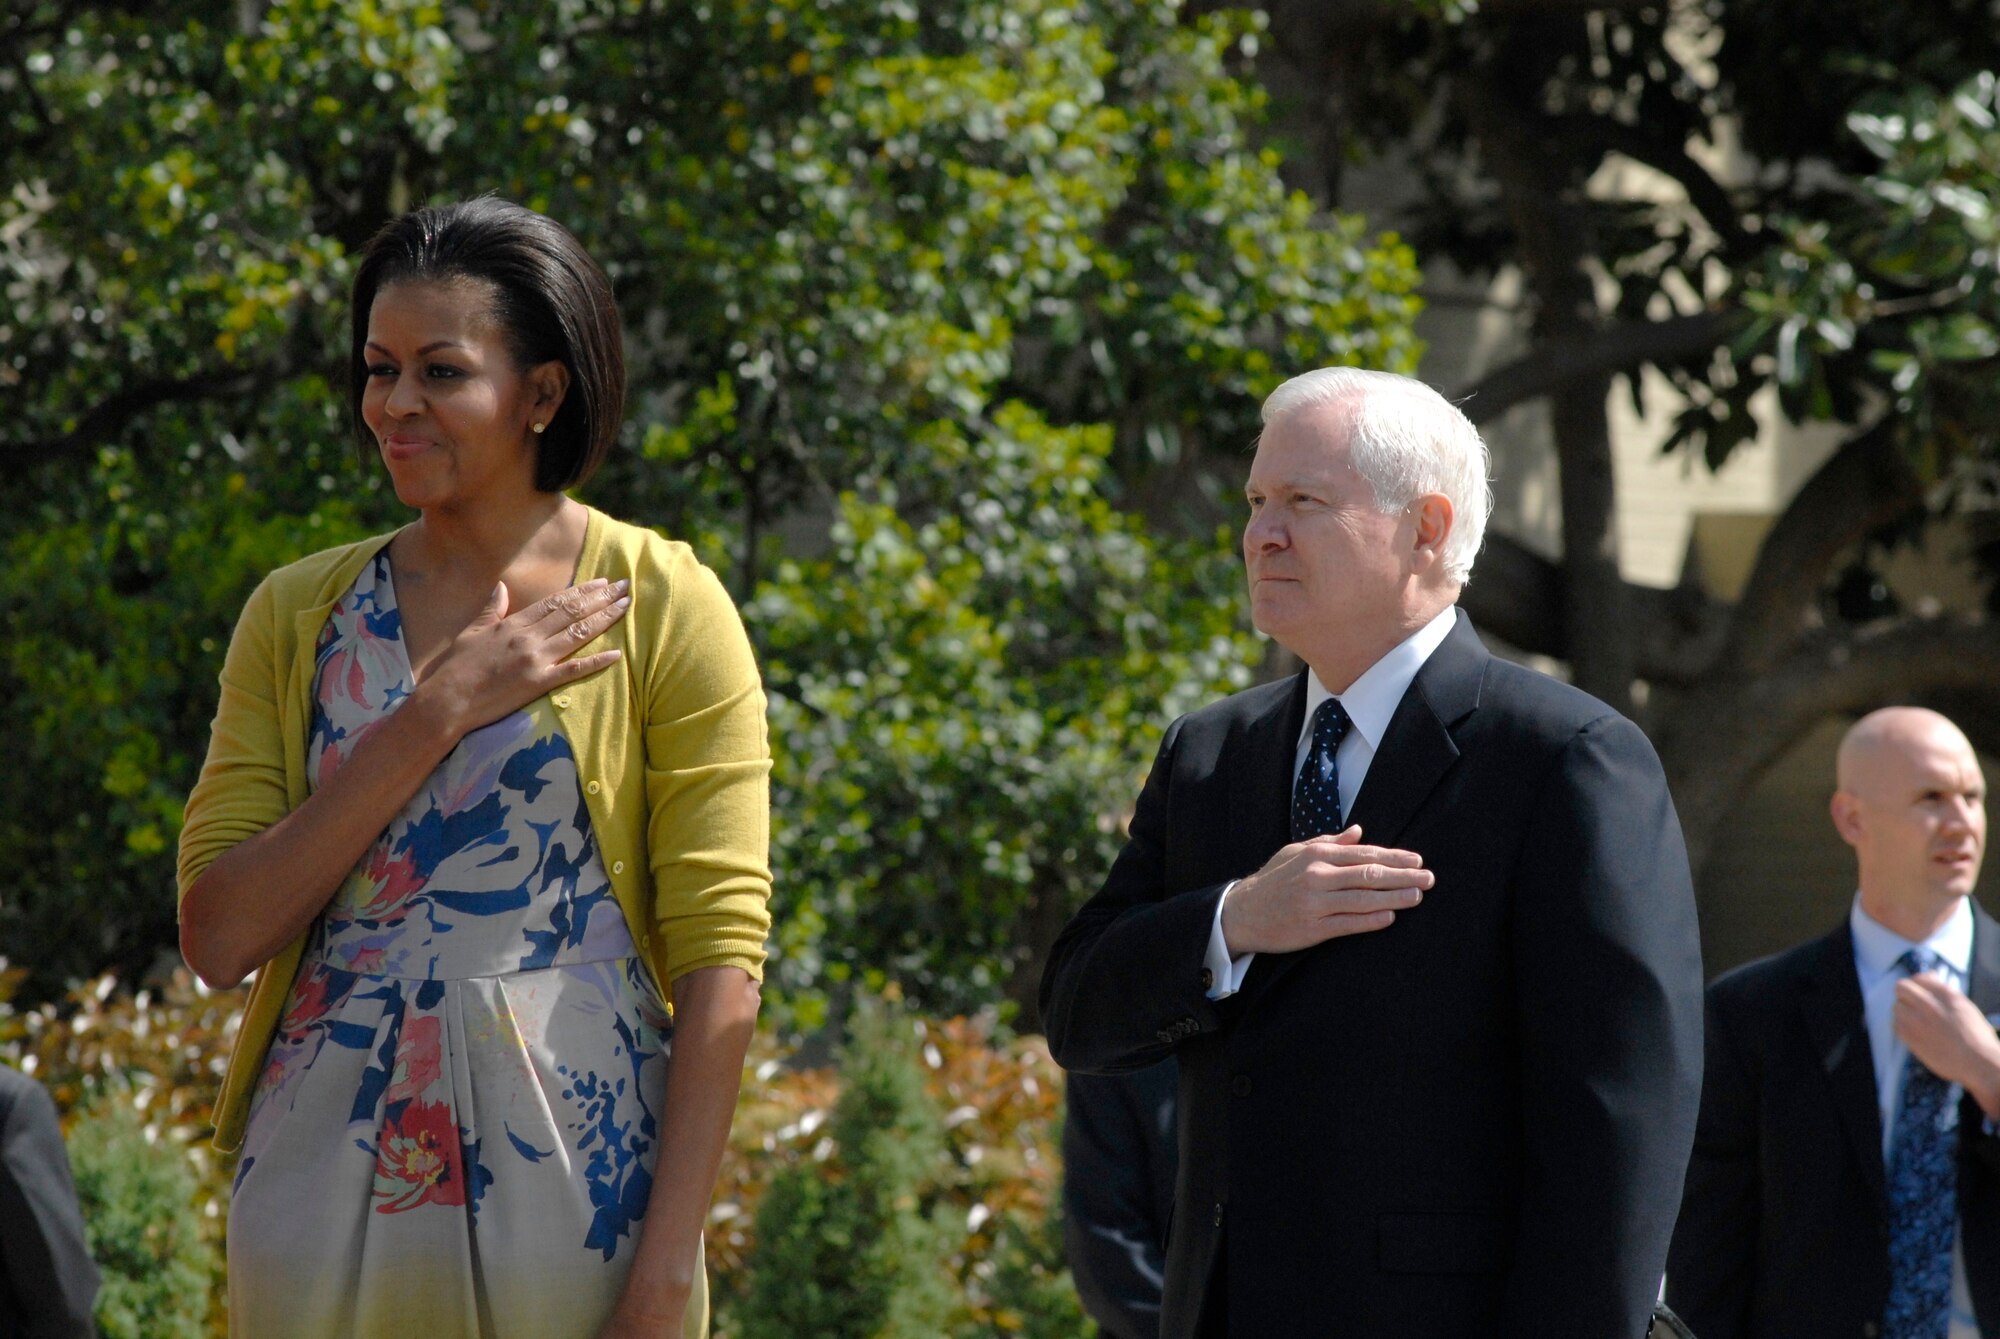 First lady Michelle Obama (left) joins host, Defense Secretary Robert Gates, as the National Anthem plays during a gathering April 9, 2010, in Washington, D.C.  The first lady visited the Pentagon and thanked the military personnel and civilian employees serving at the Defense Department. (U.S. Air Force photo/Tech. Sgt. Amaani Lyle)